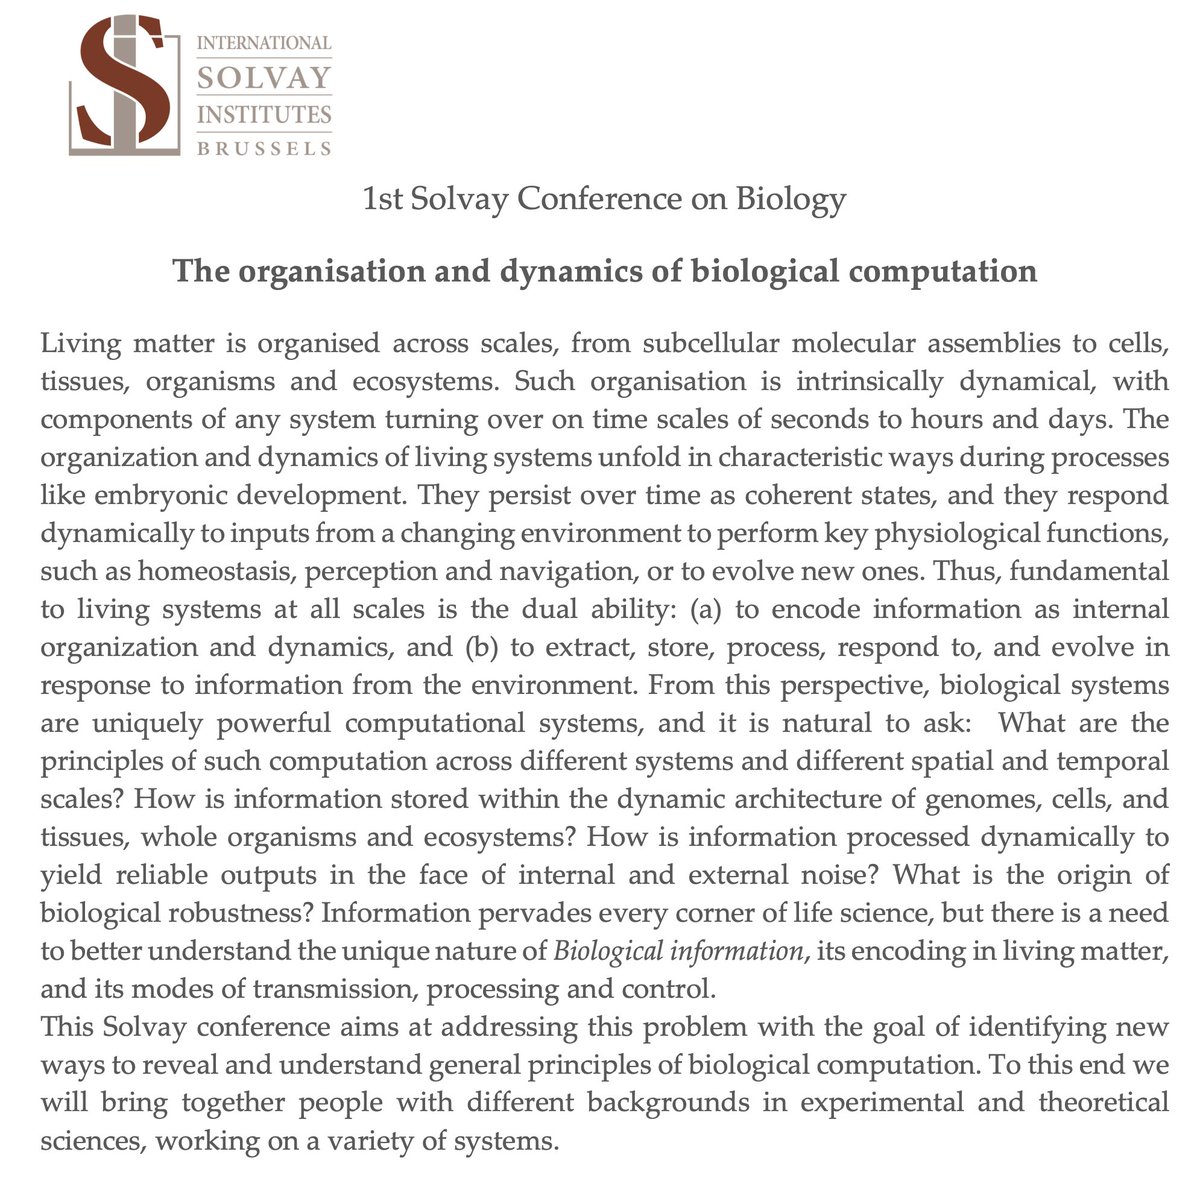 Really excited to head to Brussels for 1st Solvay Conference on Biology, co-chaired with @briscoejames, Frank Jülicher, Ed Munro, @PrakashLab & Aleks Walczak. 23 wonderful colleagues will join to discuss and delve into the central pb of information processing & computation. 🧵